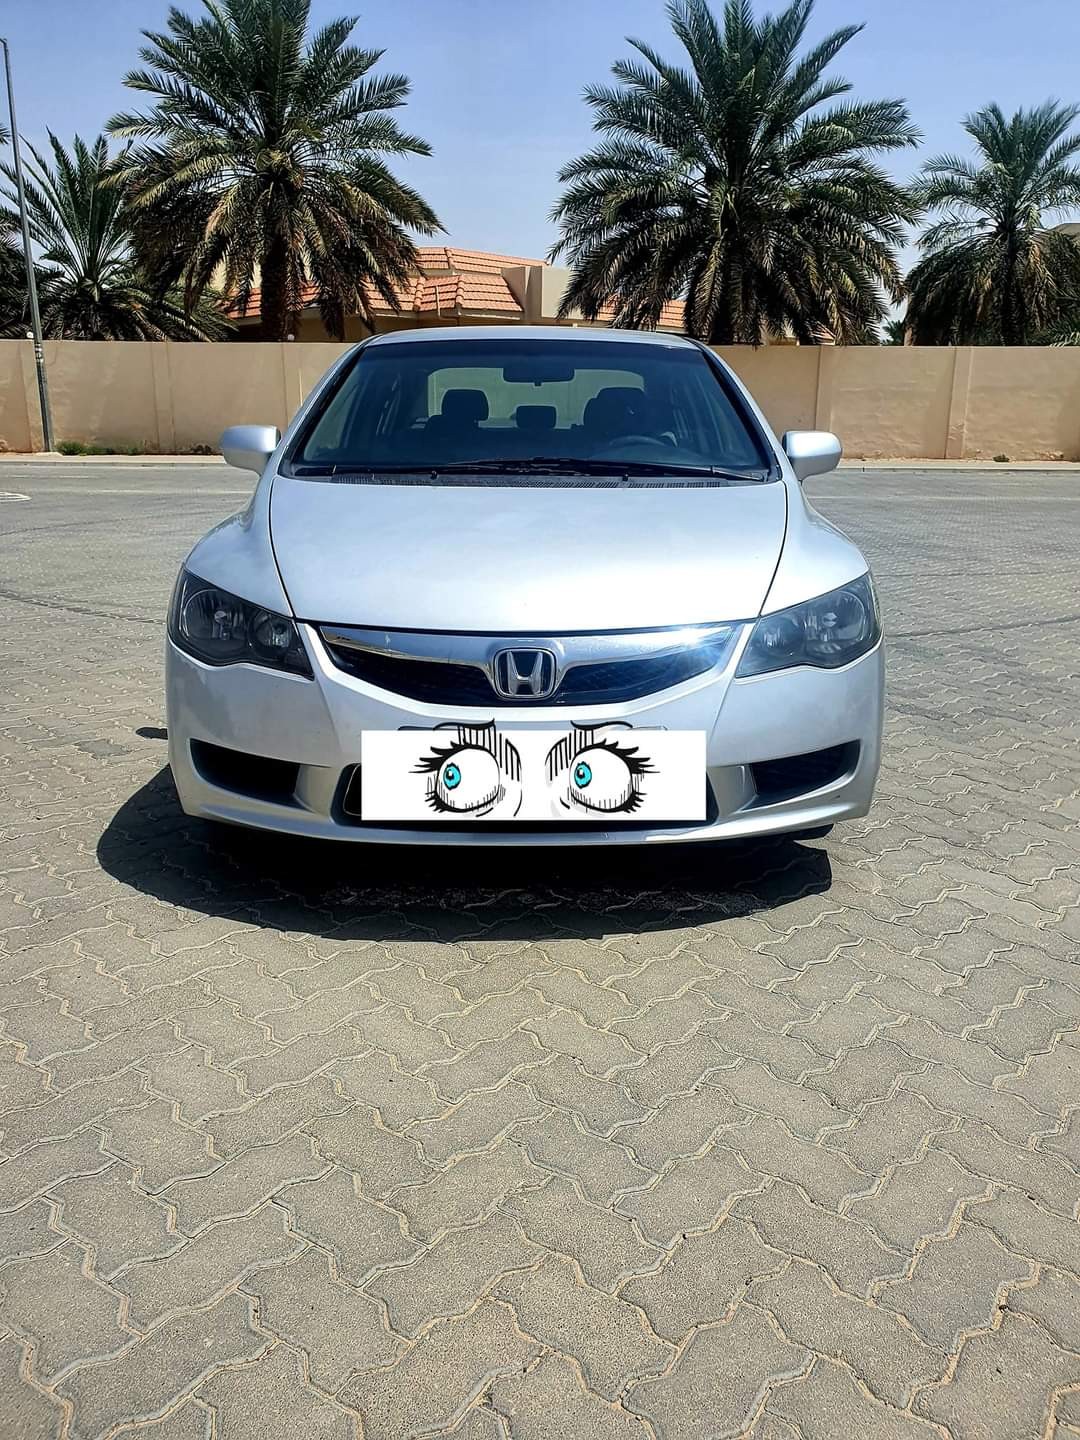 Well-Maintained 2009 Honda Civic Offered for 8,000 Dirhams